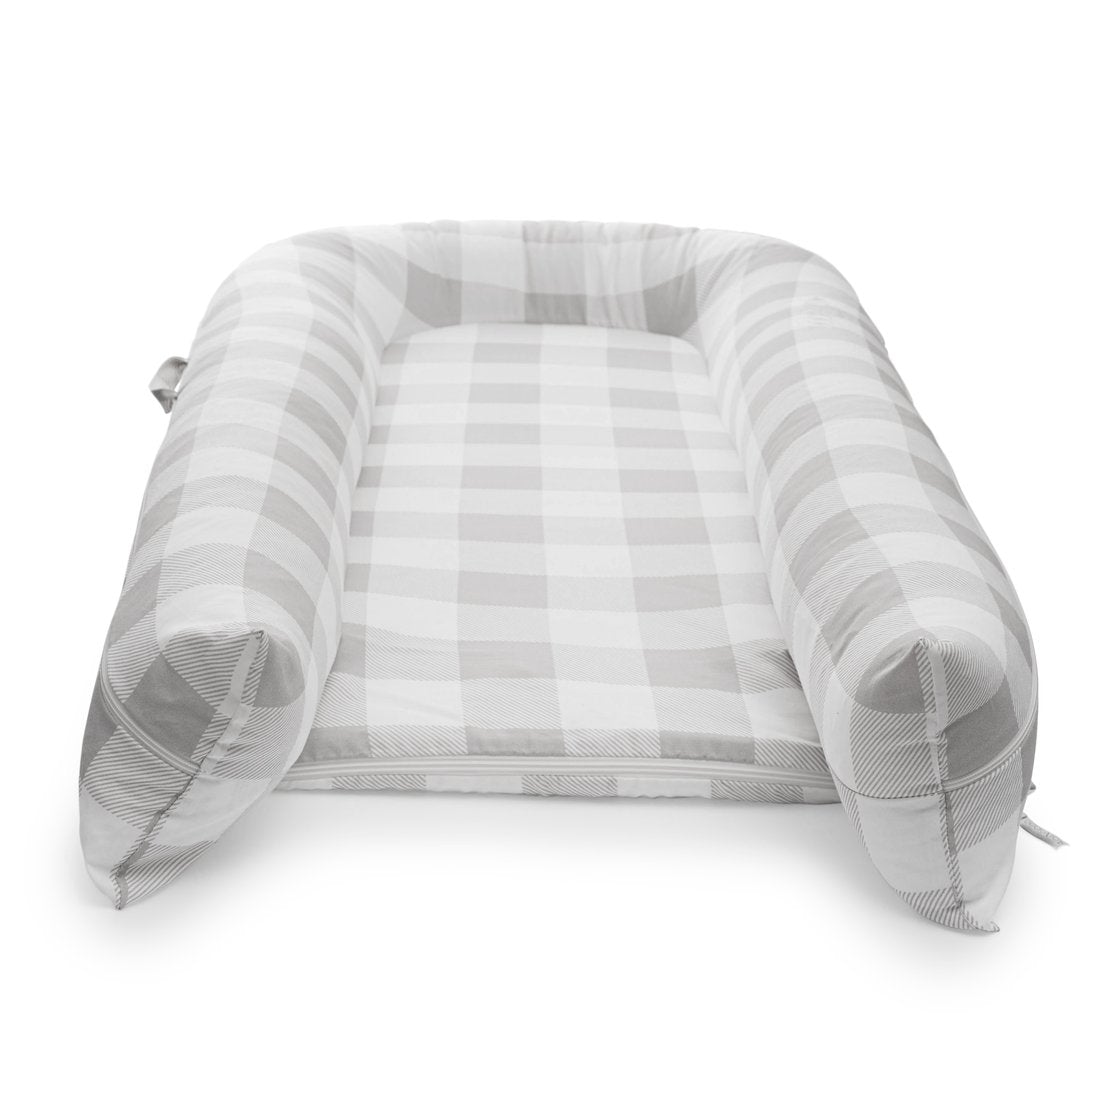 DockATot Grand Dock, Perfect for Lounging and Playtime, Prints - ANB Baby -$100 - $300